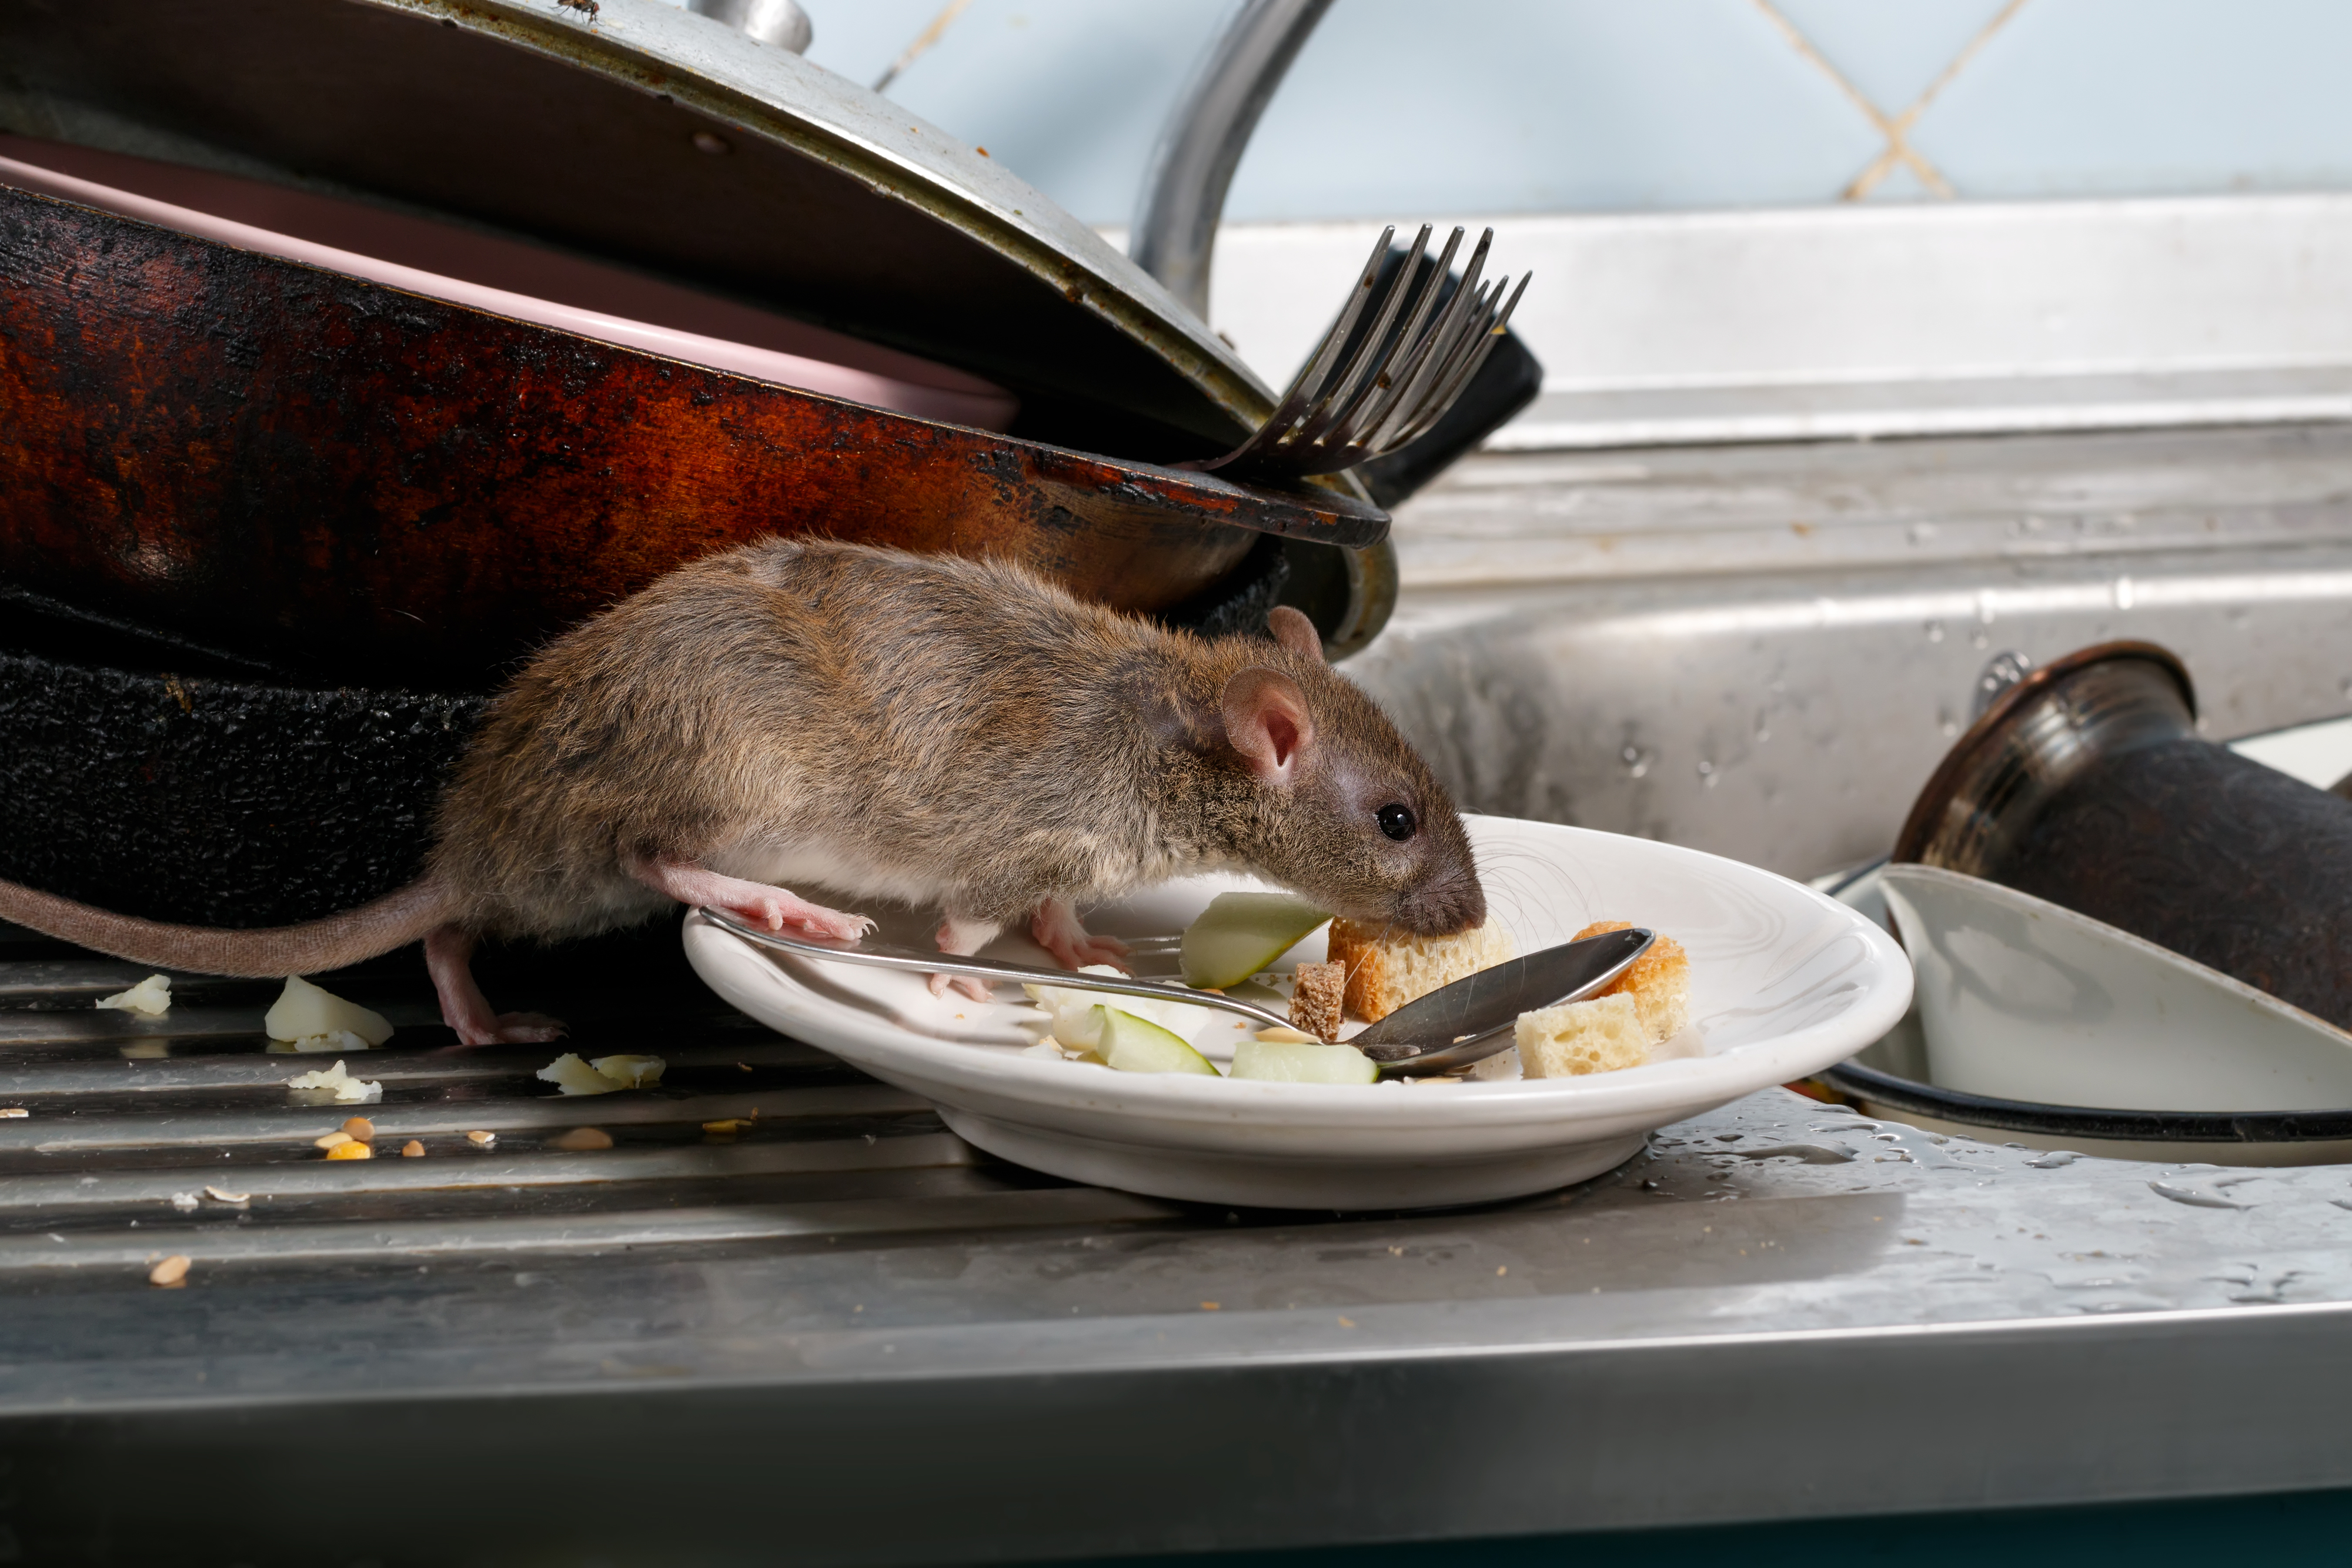 A rat scavenging food from a dirty plate in a cluttered sink